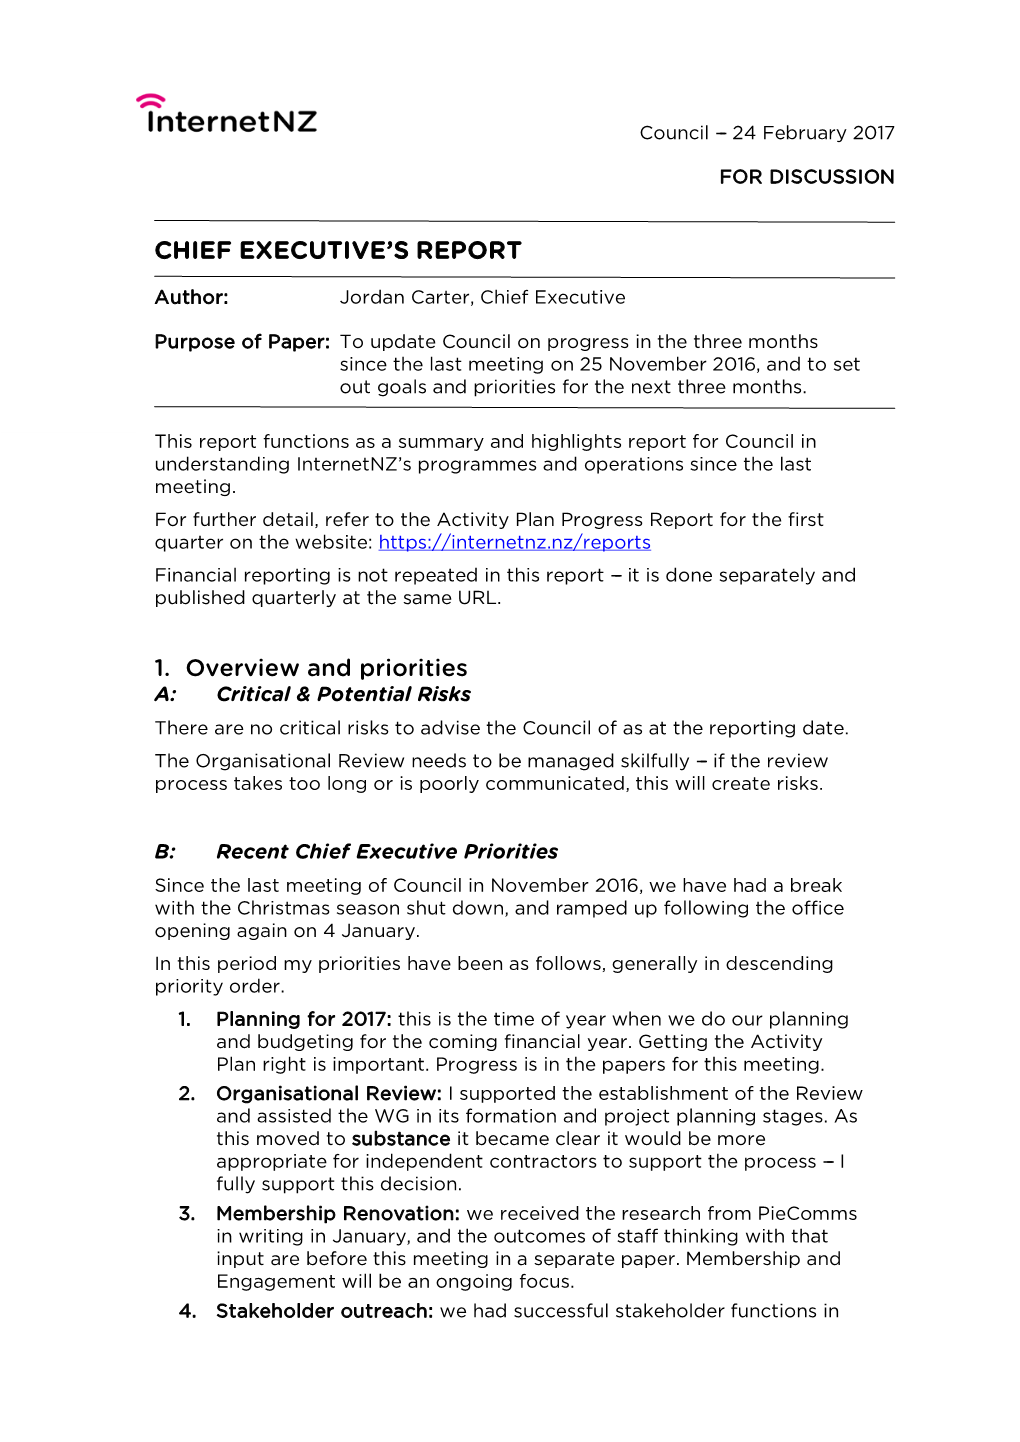 CHIEF EXECUTIVE's REPORT 1. Overview and Priorities